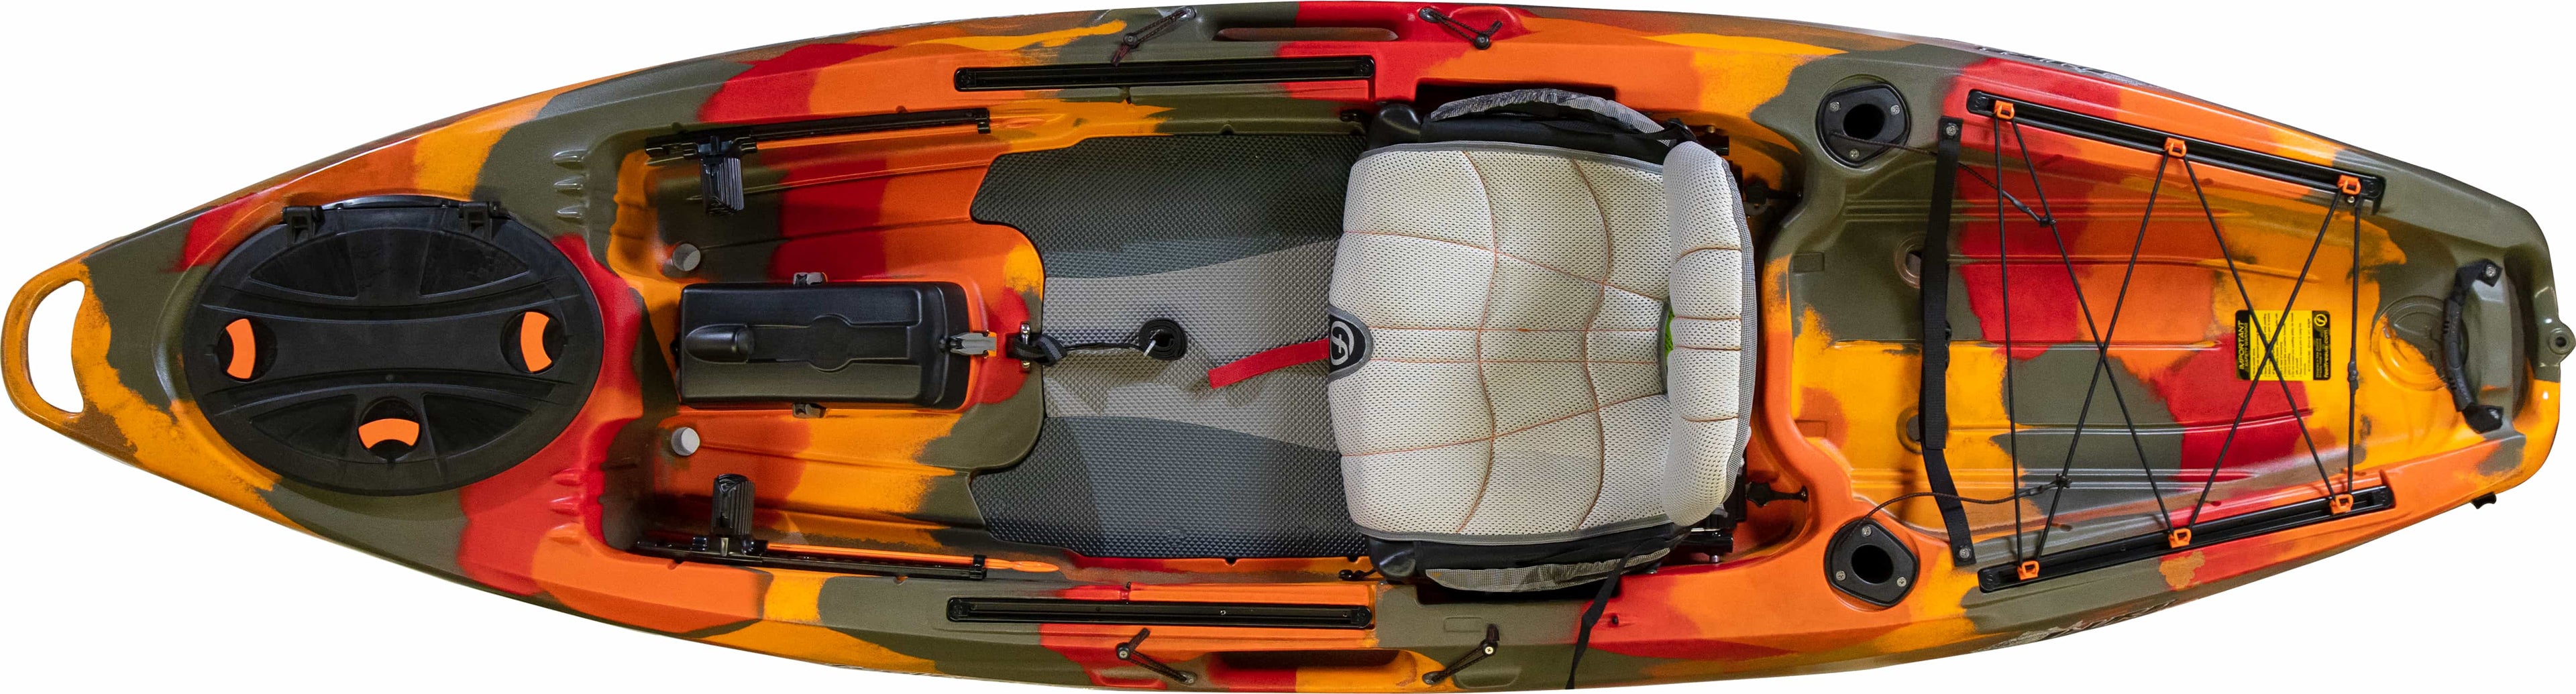 Lure kayak for rivers and lakes with very comfortable seat – Feel Free